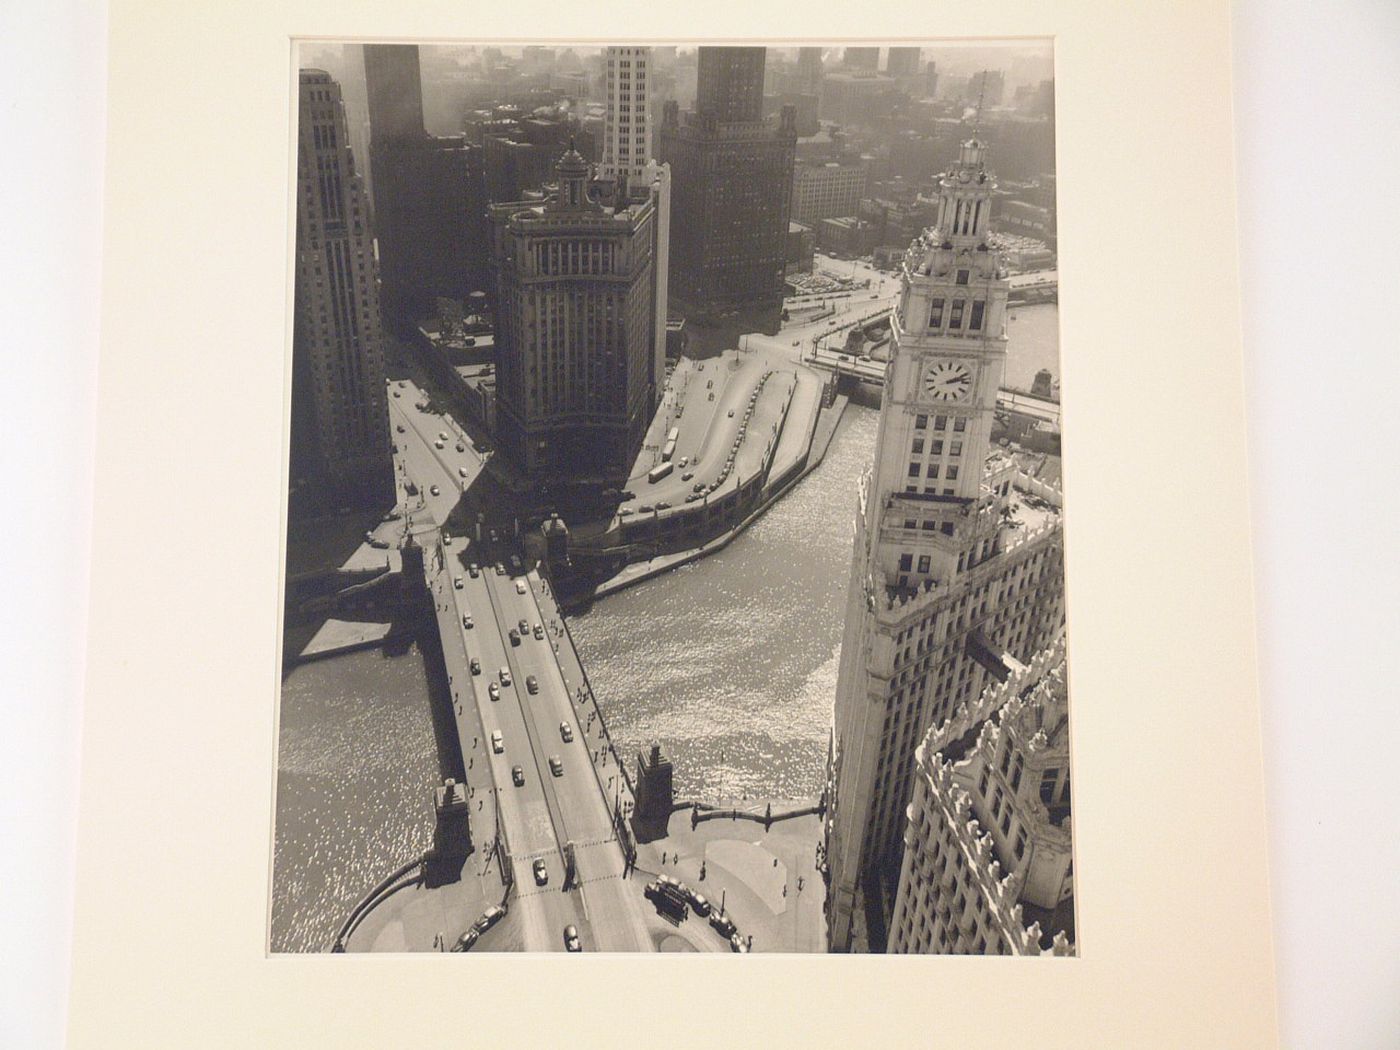 Looking down on buildings and bridges across river, Chicago, Illinois